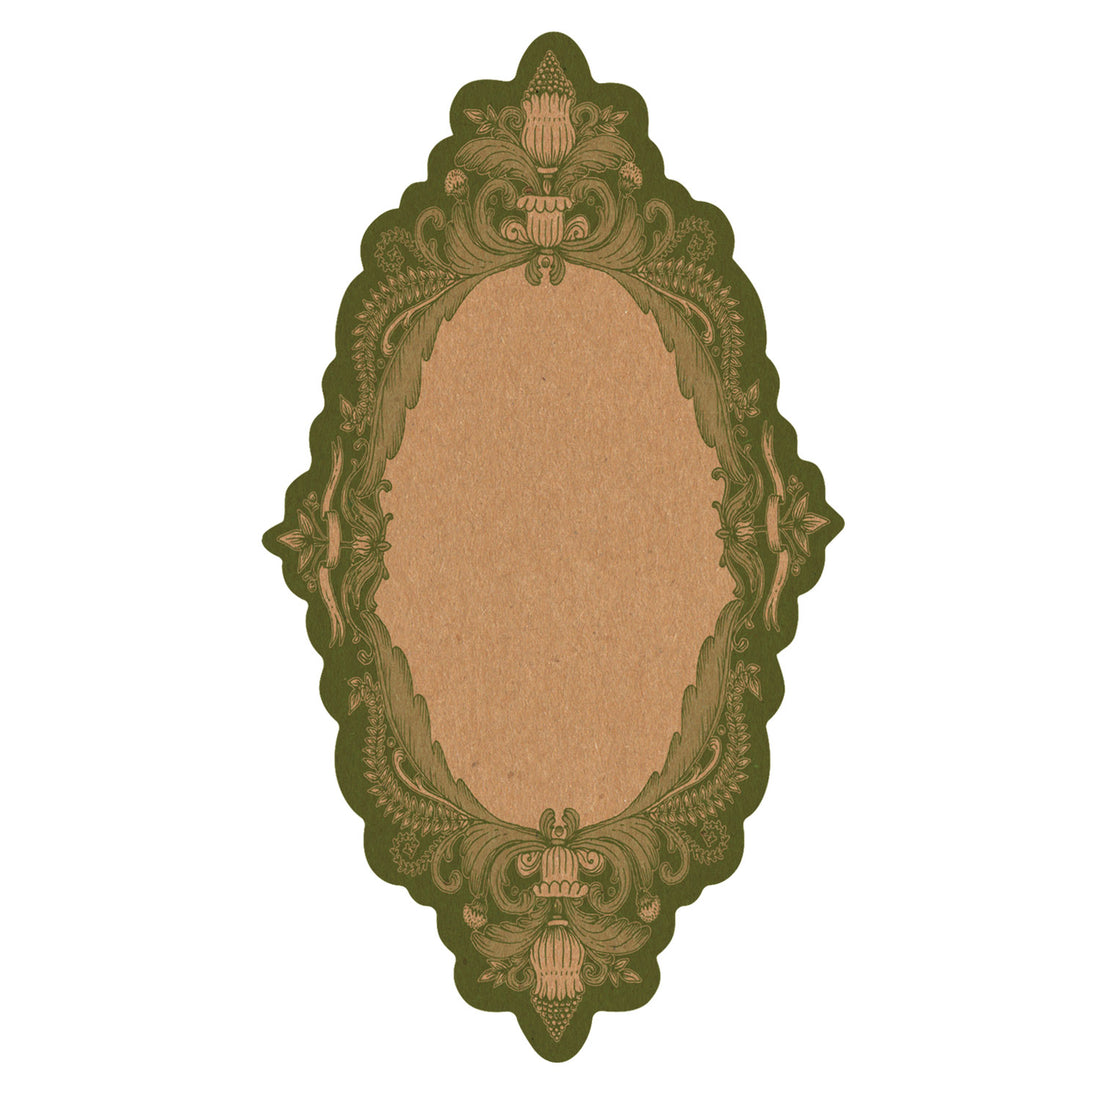 A die-cut, scalloped kraft paper table accent with an ornate, French toile-style design in green around the edges.